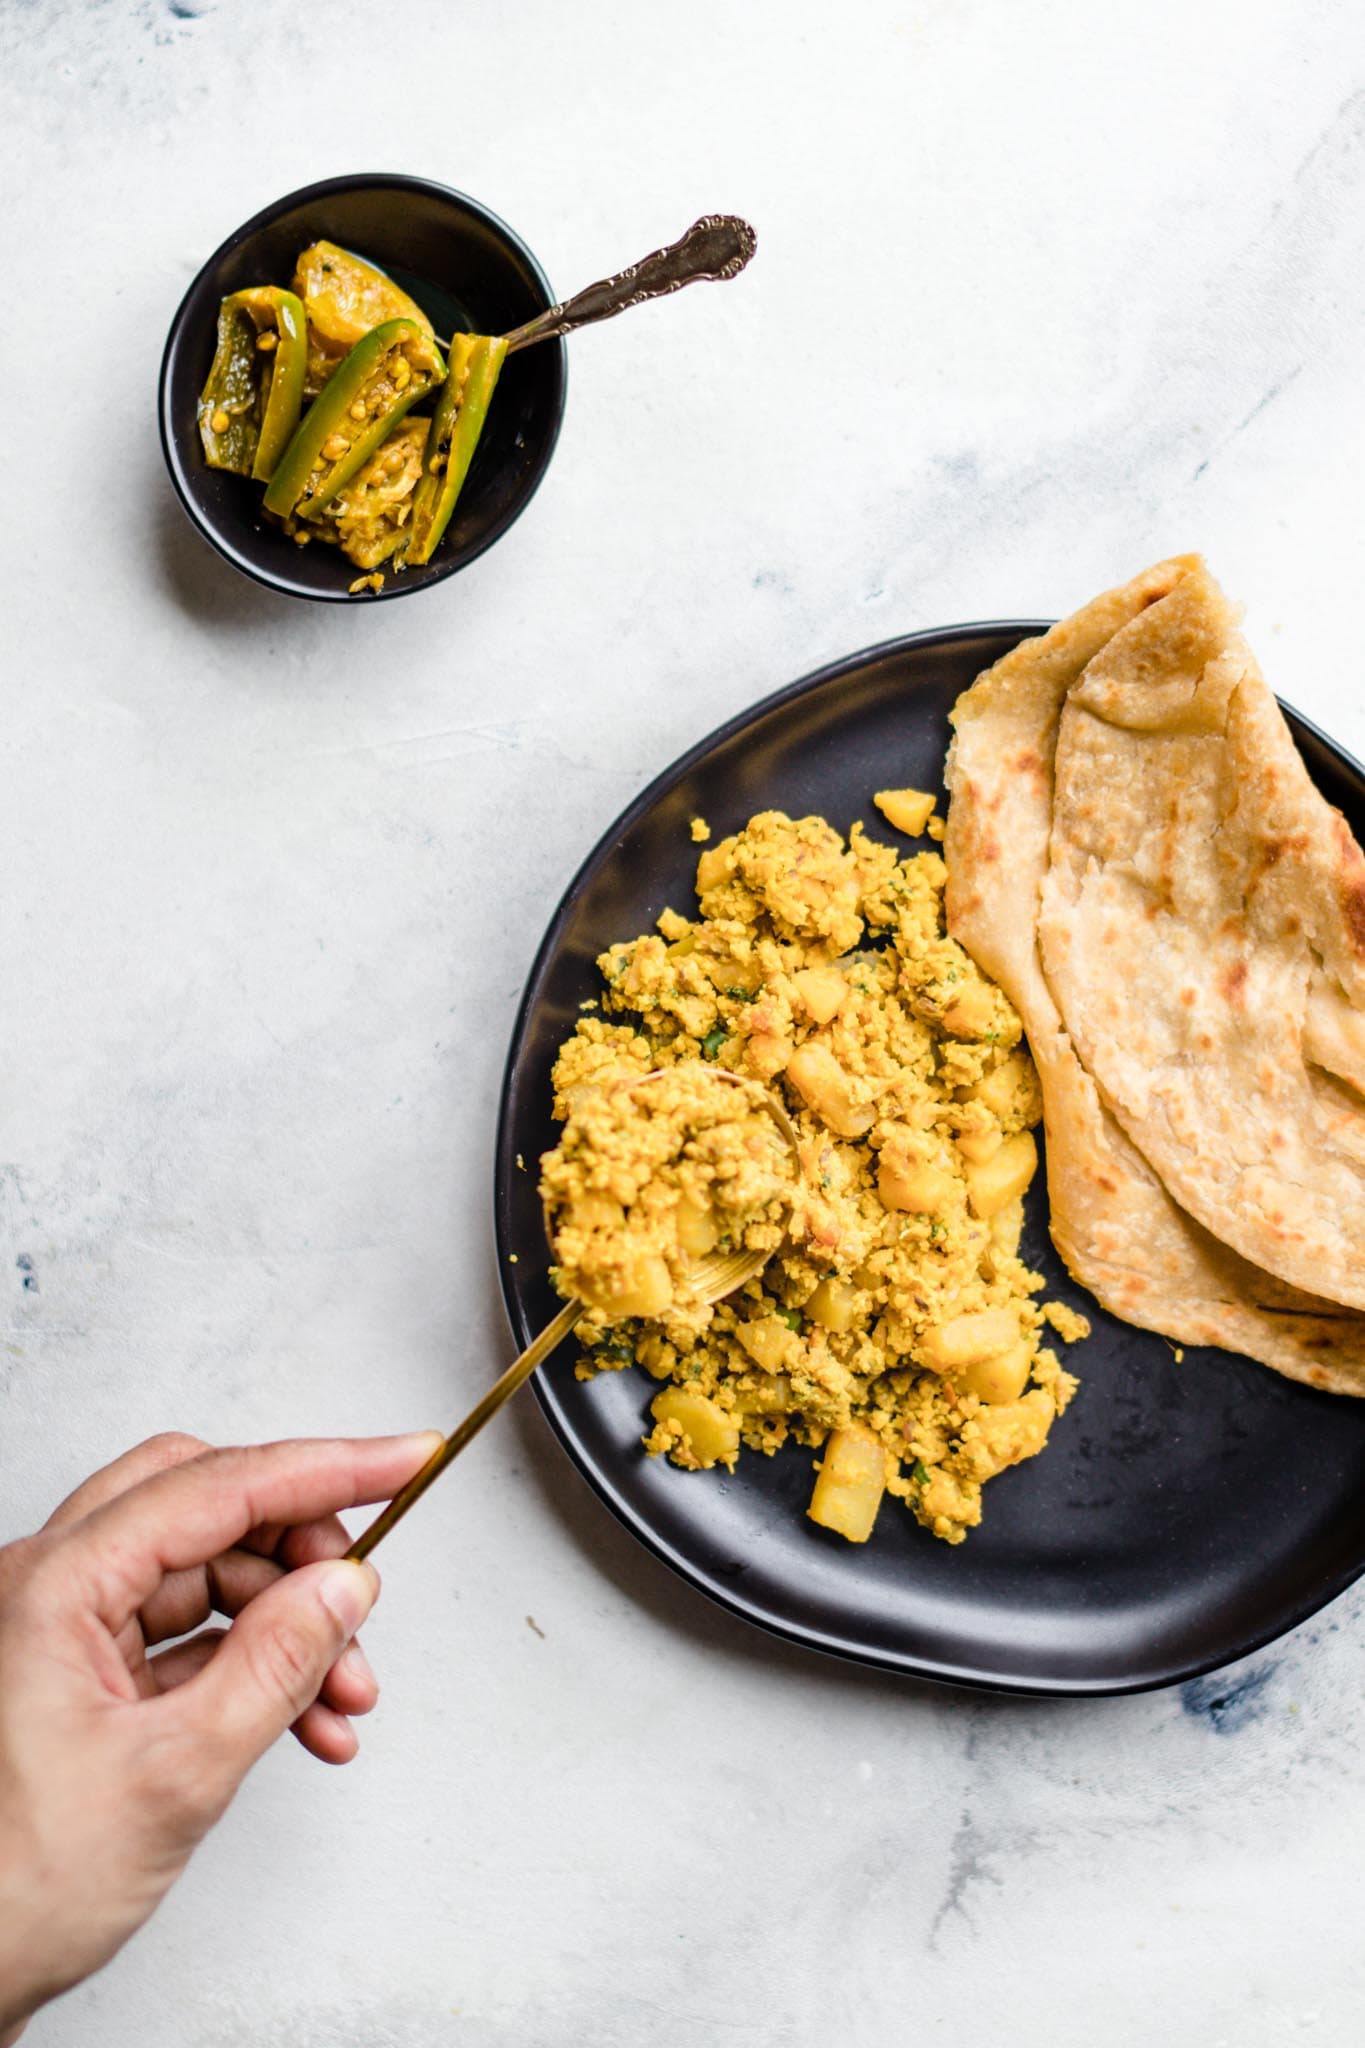 Holding a spoon with scrambled egg and potato curry over a plate